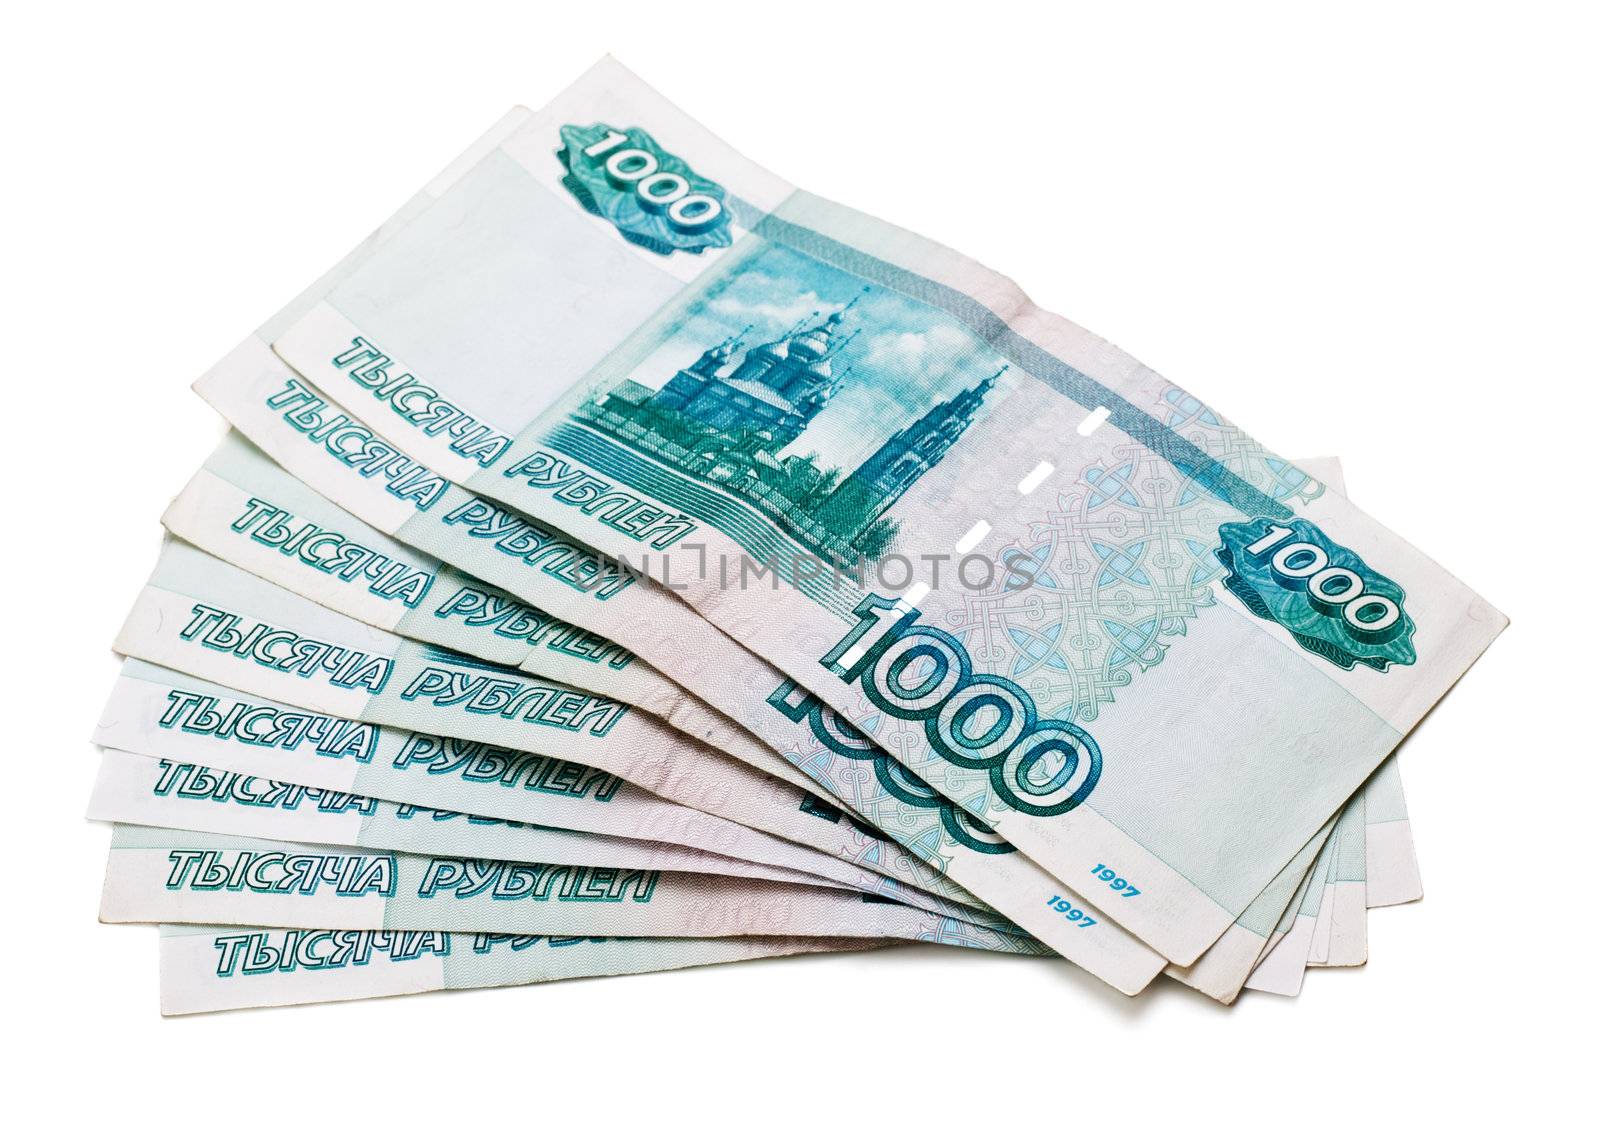 banknotes of Russia by petr_malyshev